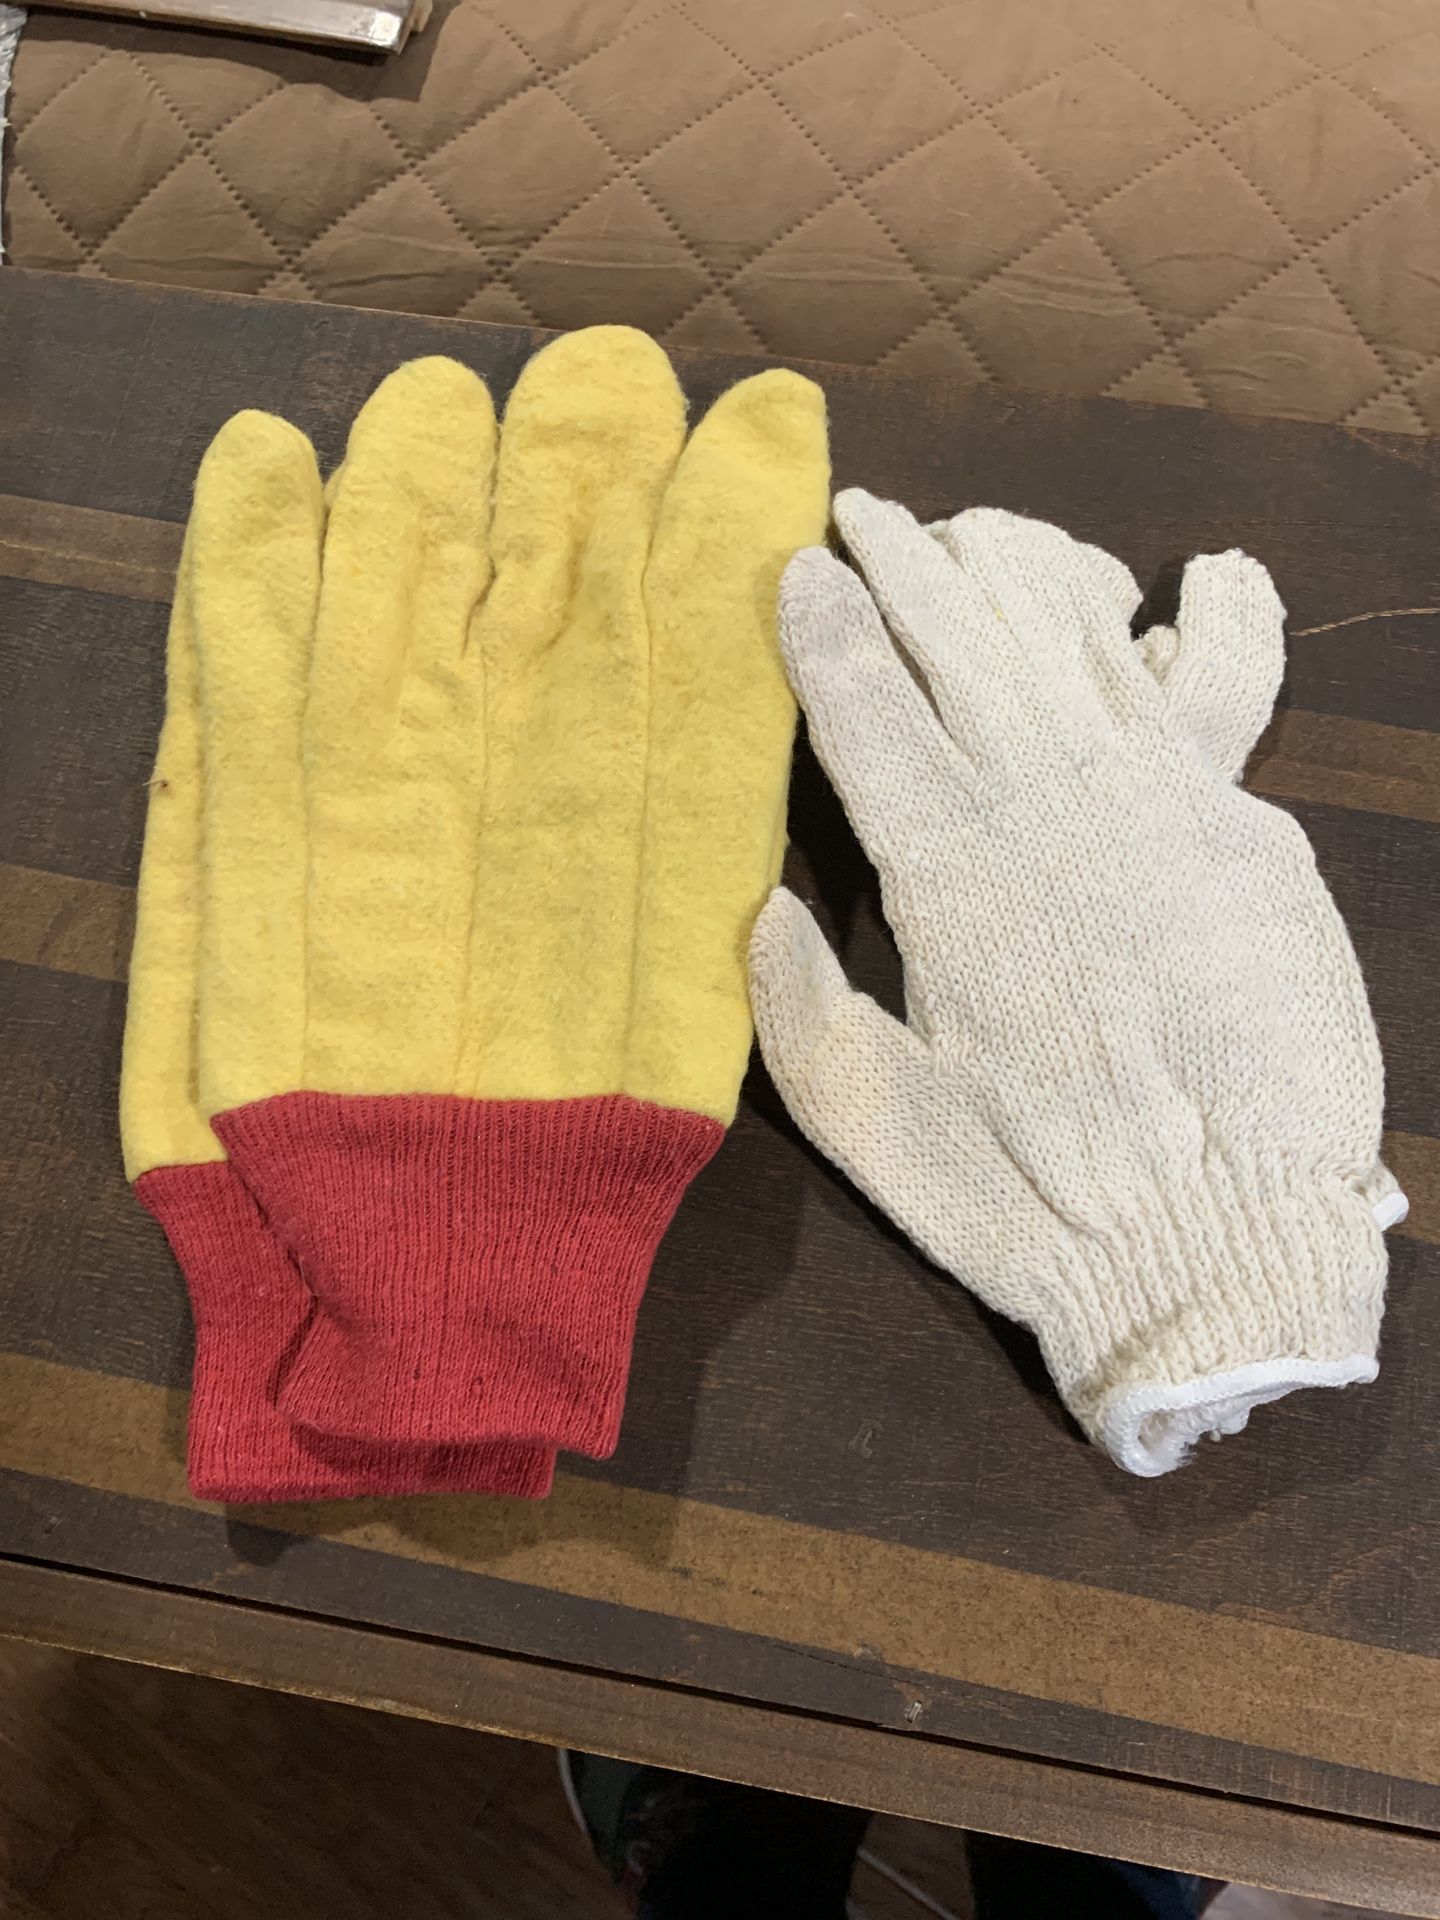 2 Pairs of Gloves